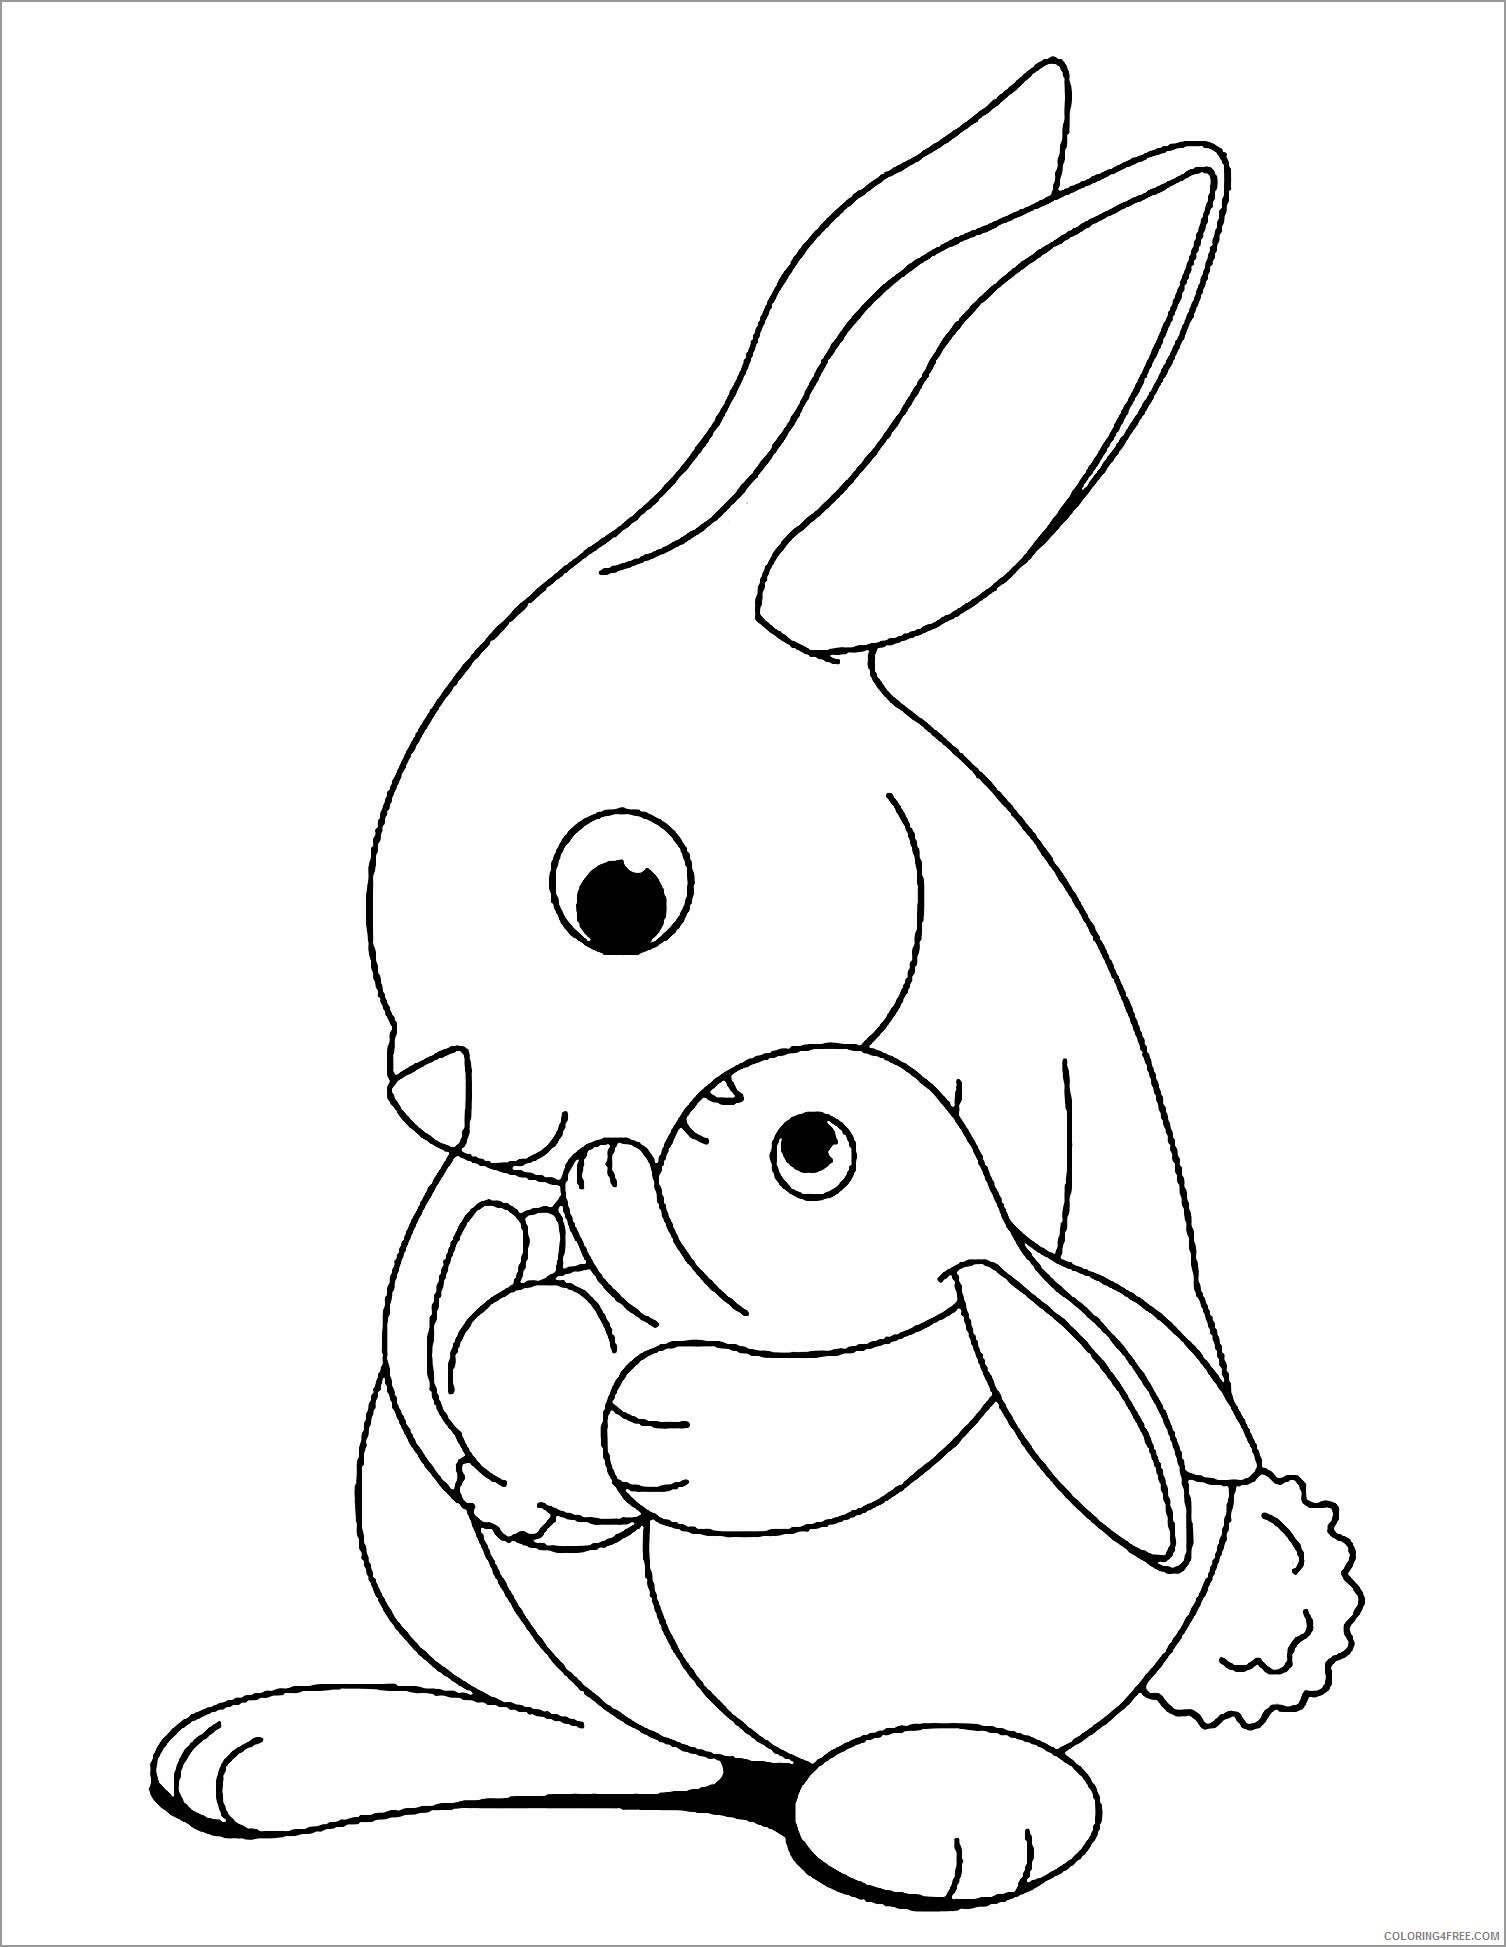 Rabbit Coloring Pages Animal Printable Sheets rabbit to print 2021 4183 Coloring4free